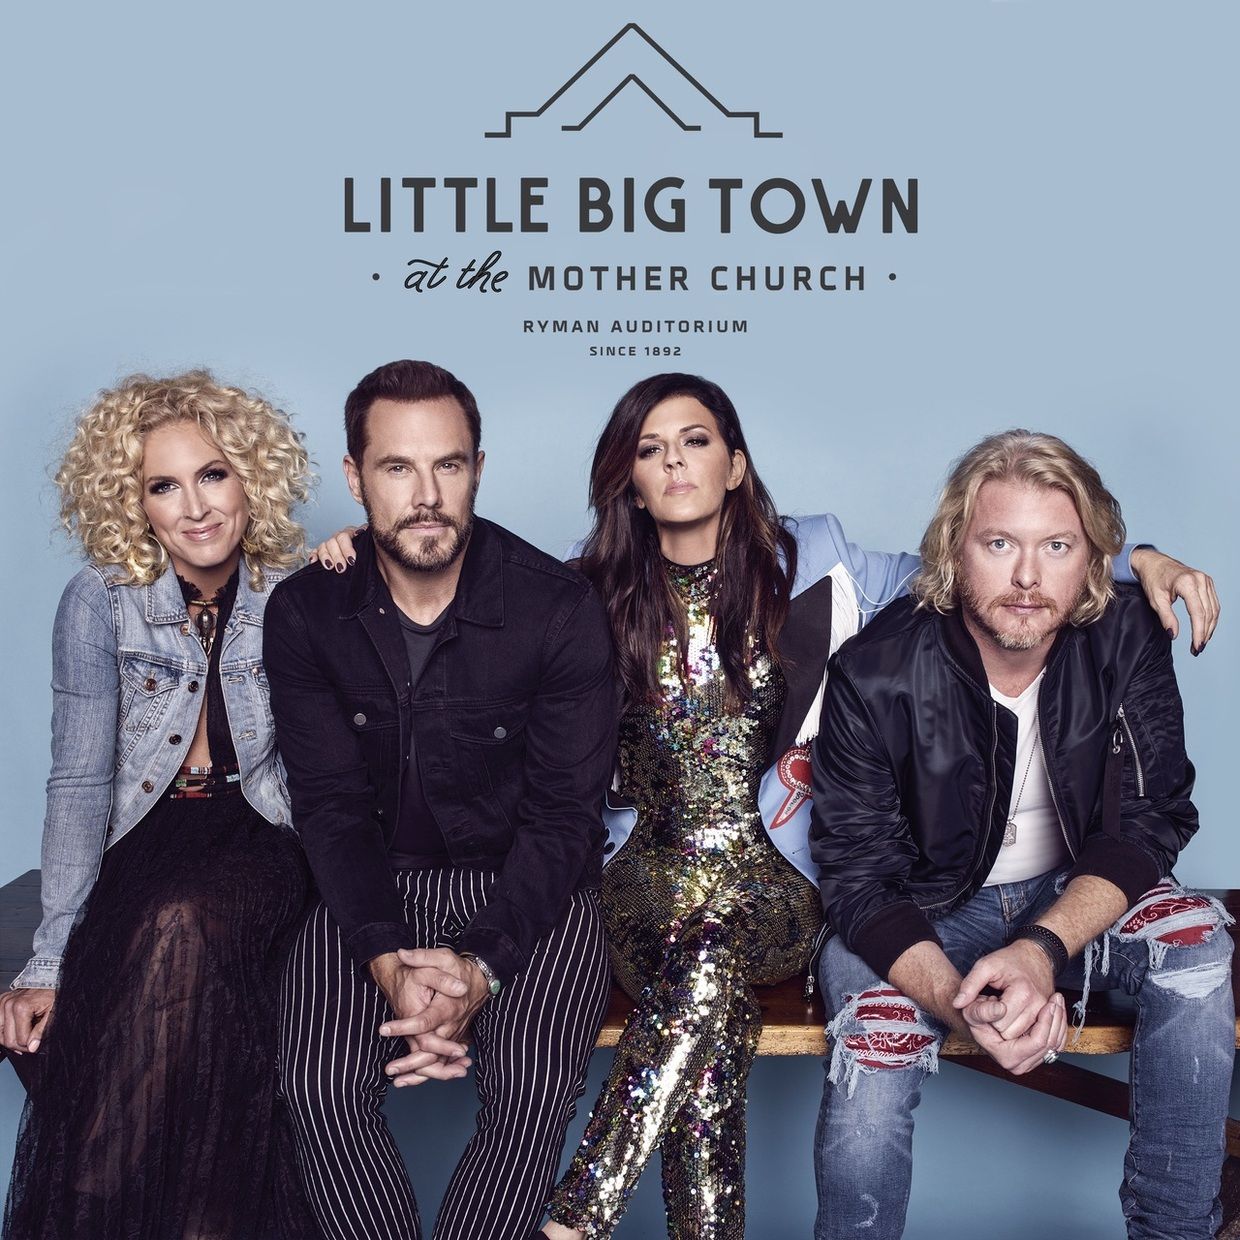 LITTLE BIG TOWN MAKE HISTORY WITH SOLD OUT “LITTLE BIG TOWN AT THE MOTHER CHURCH” RYMAN RESIDENCY SHOWS